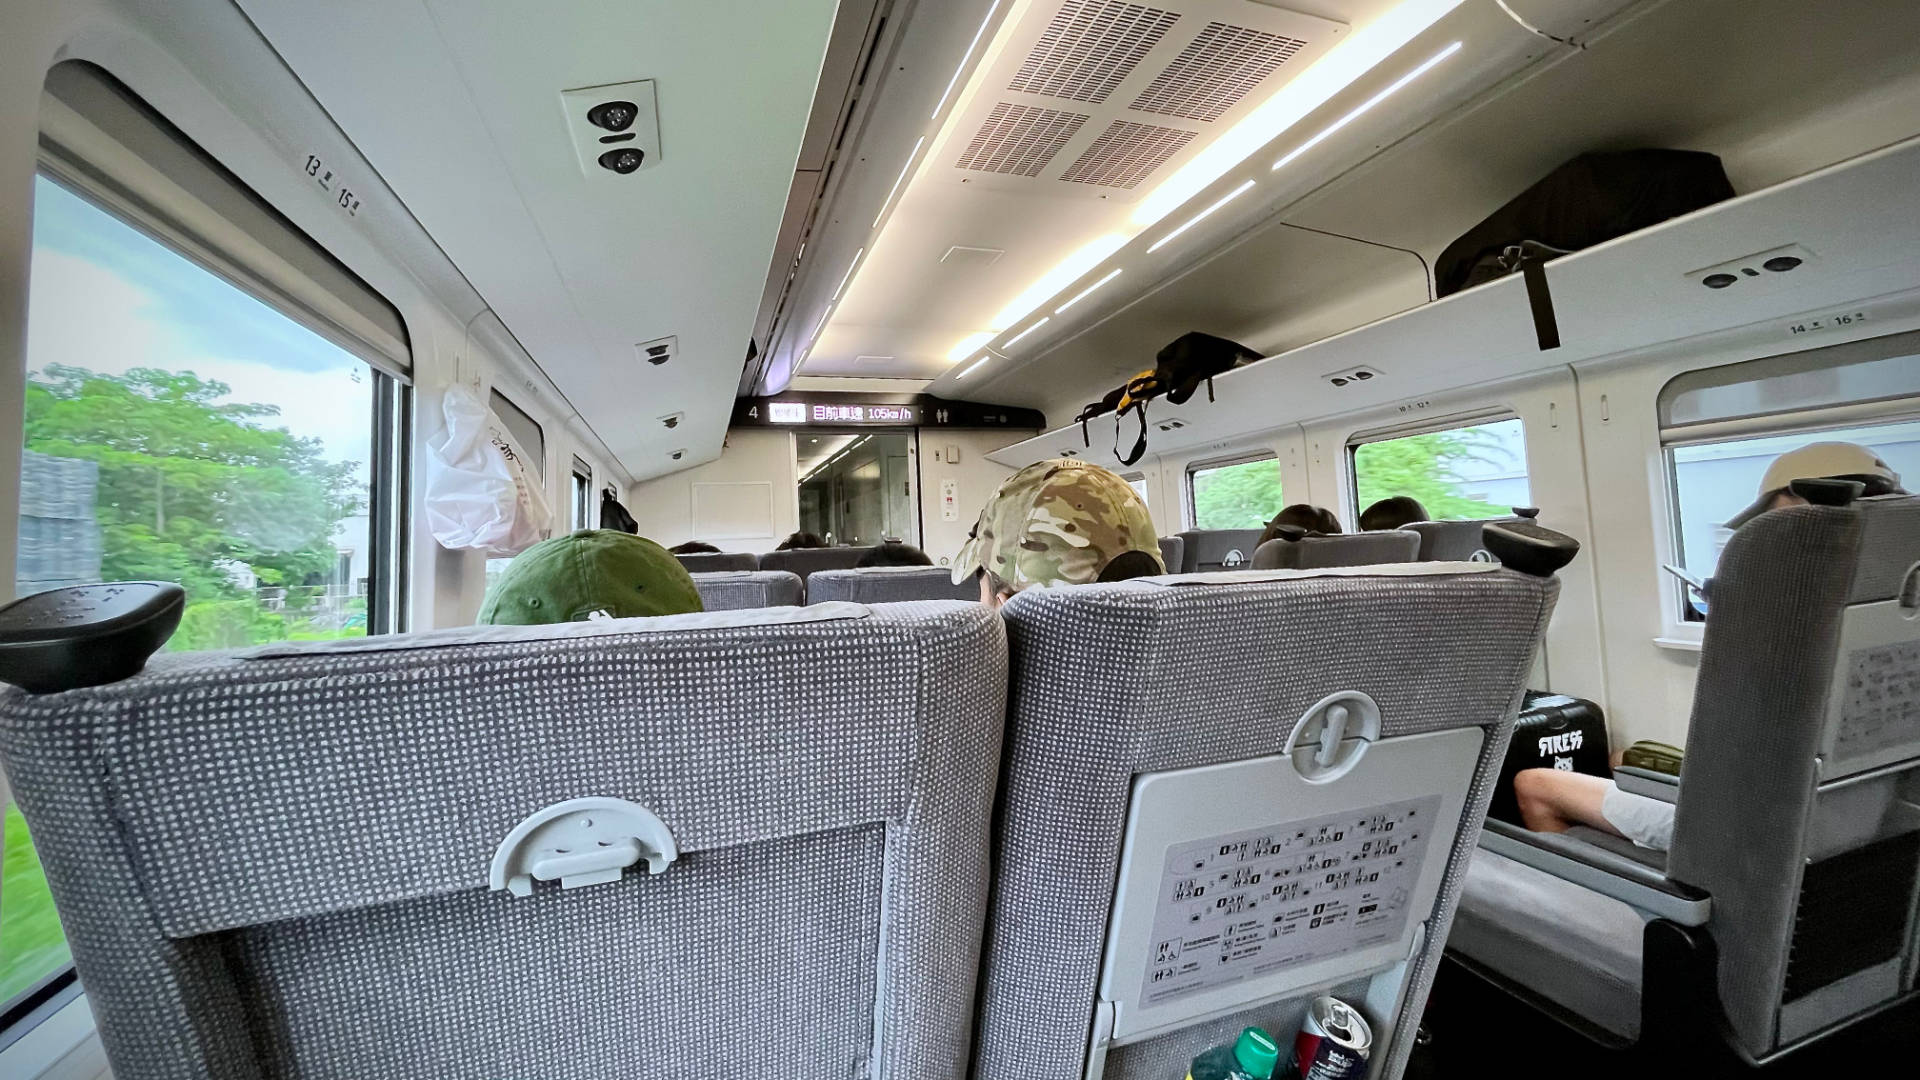 Interior of a train carriage. There are two seats each side of the aisle, and lush-looking scenery outside the windows.